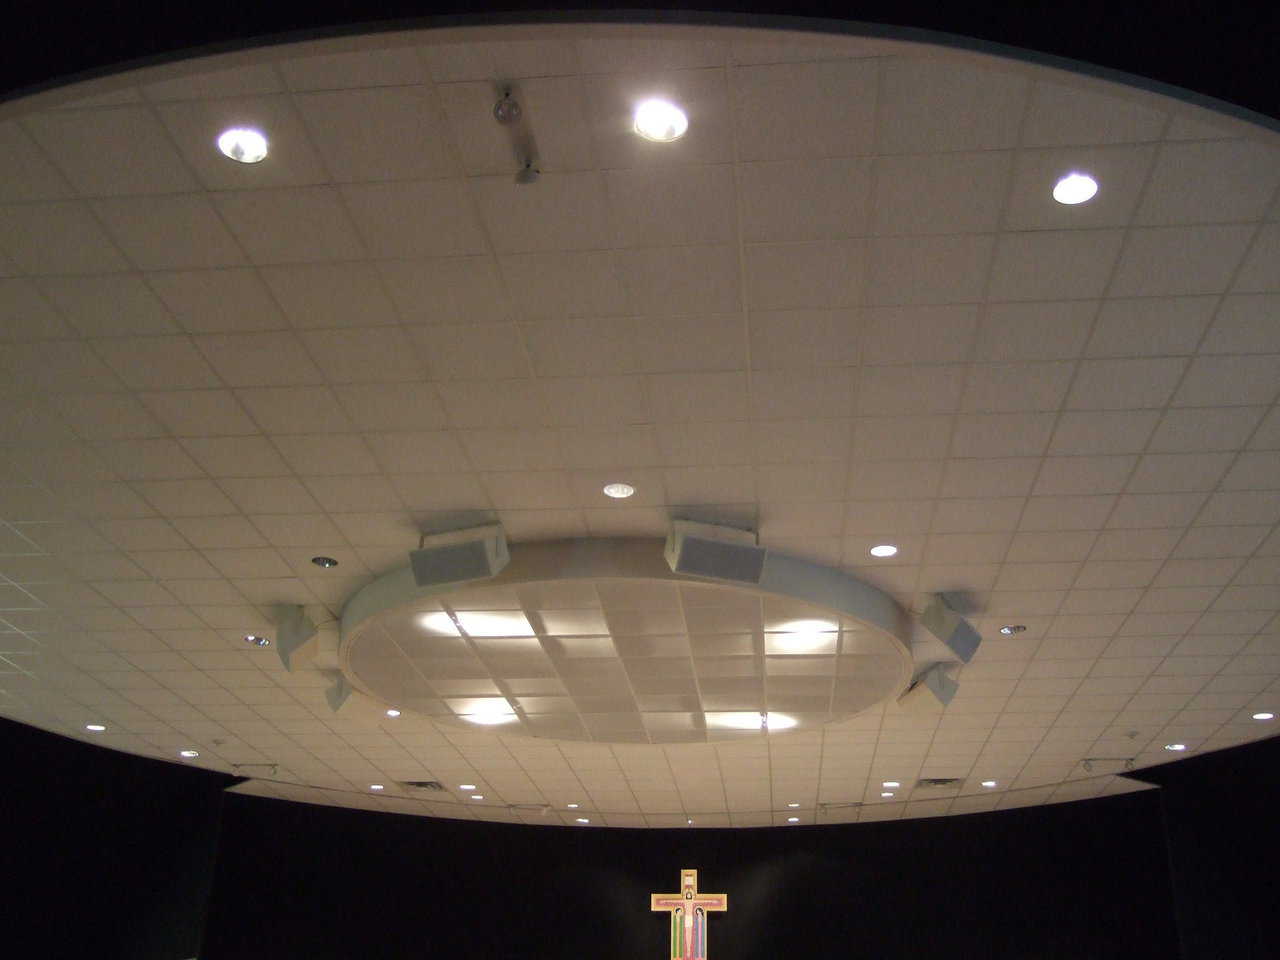 Ceiling — This sparkling white, acoustical, drop-in ceiling is an assembly of rectangular tiles within a circle. Heating and air conditioning equipment sits in the space between the ceiling and the top of the dome.